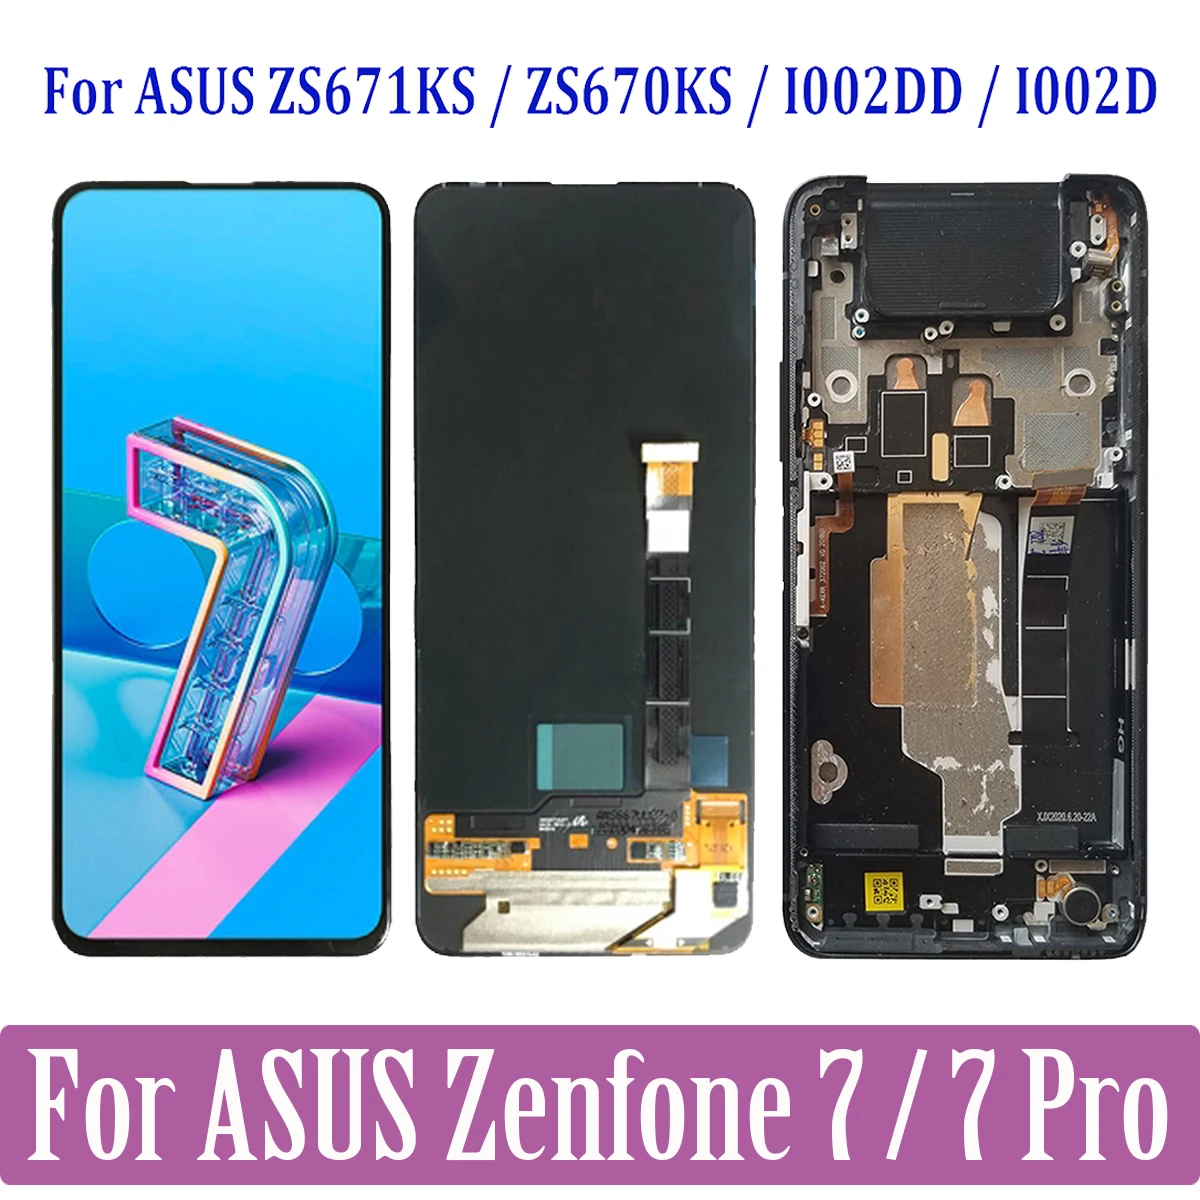 

AMOLED For Asus Zenfone 7 Pro 7Pro ZS671KS I002DD LCD Zenfone7 ZS670KS I002D Display Touch Screen Digitizer Assembly